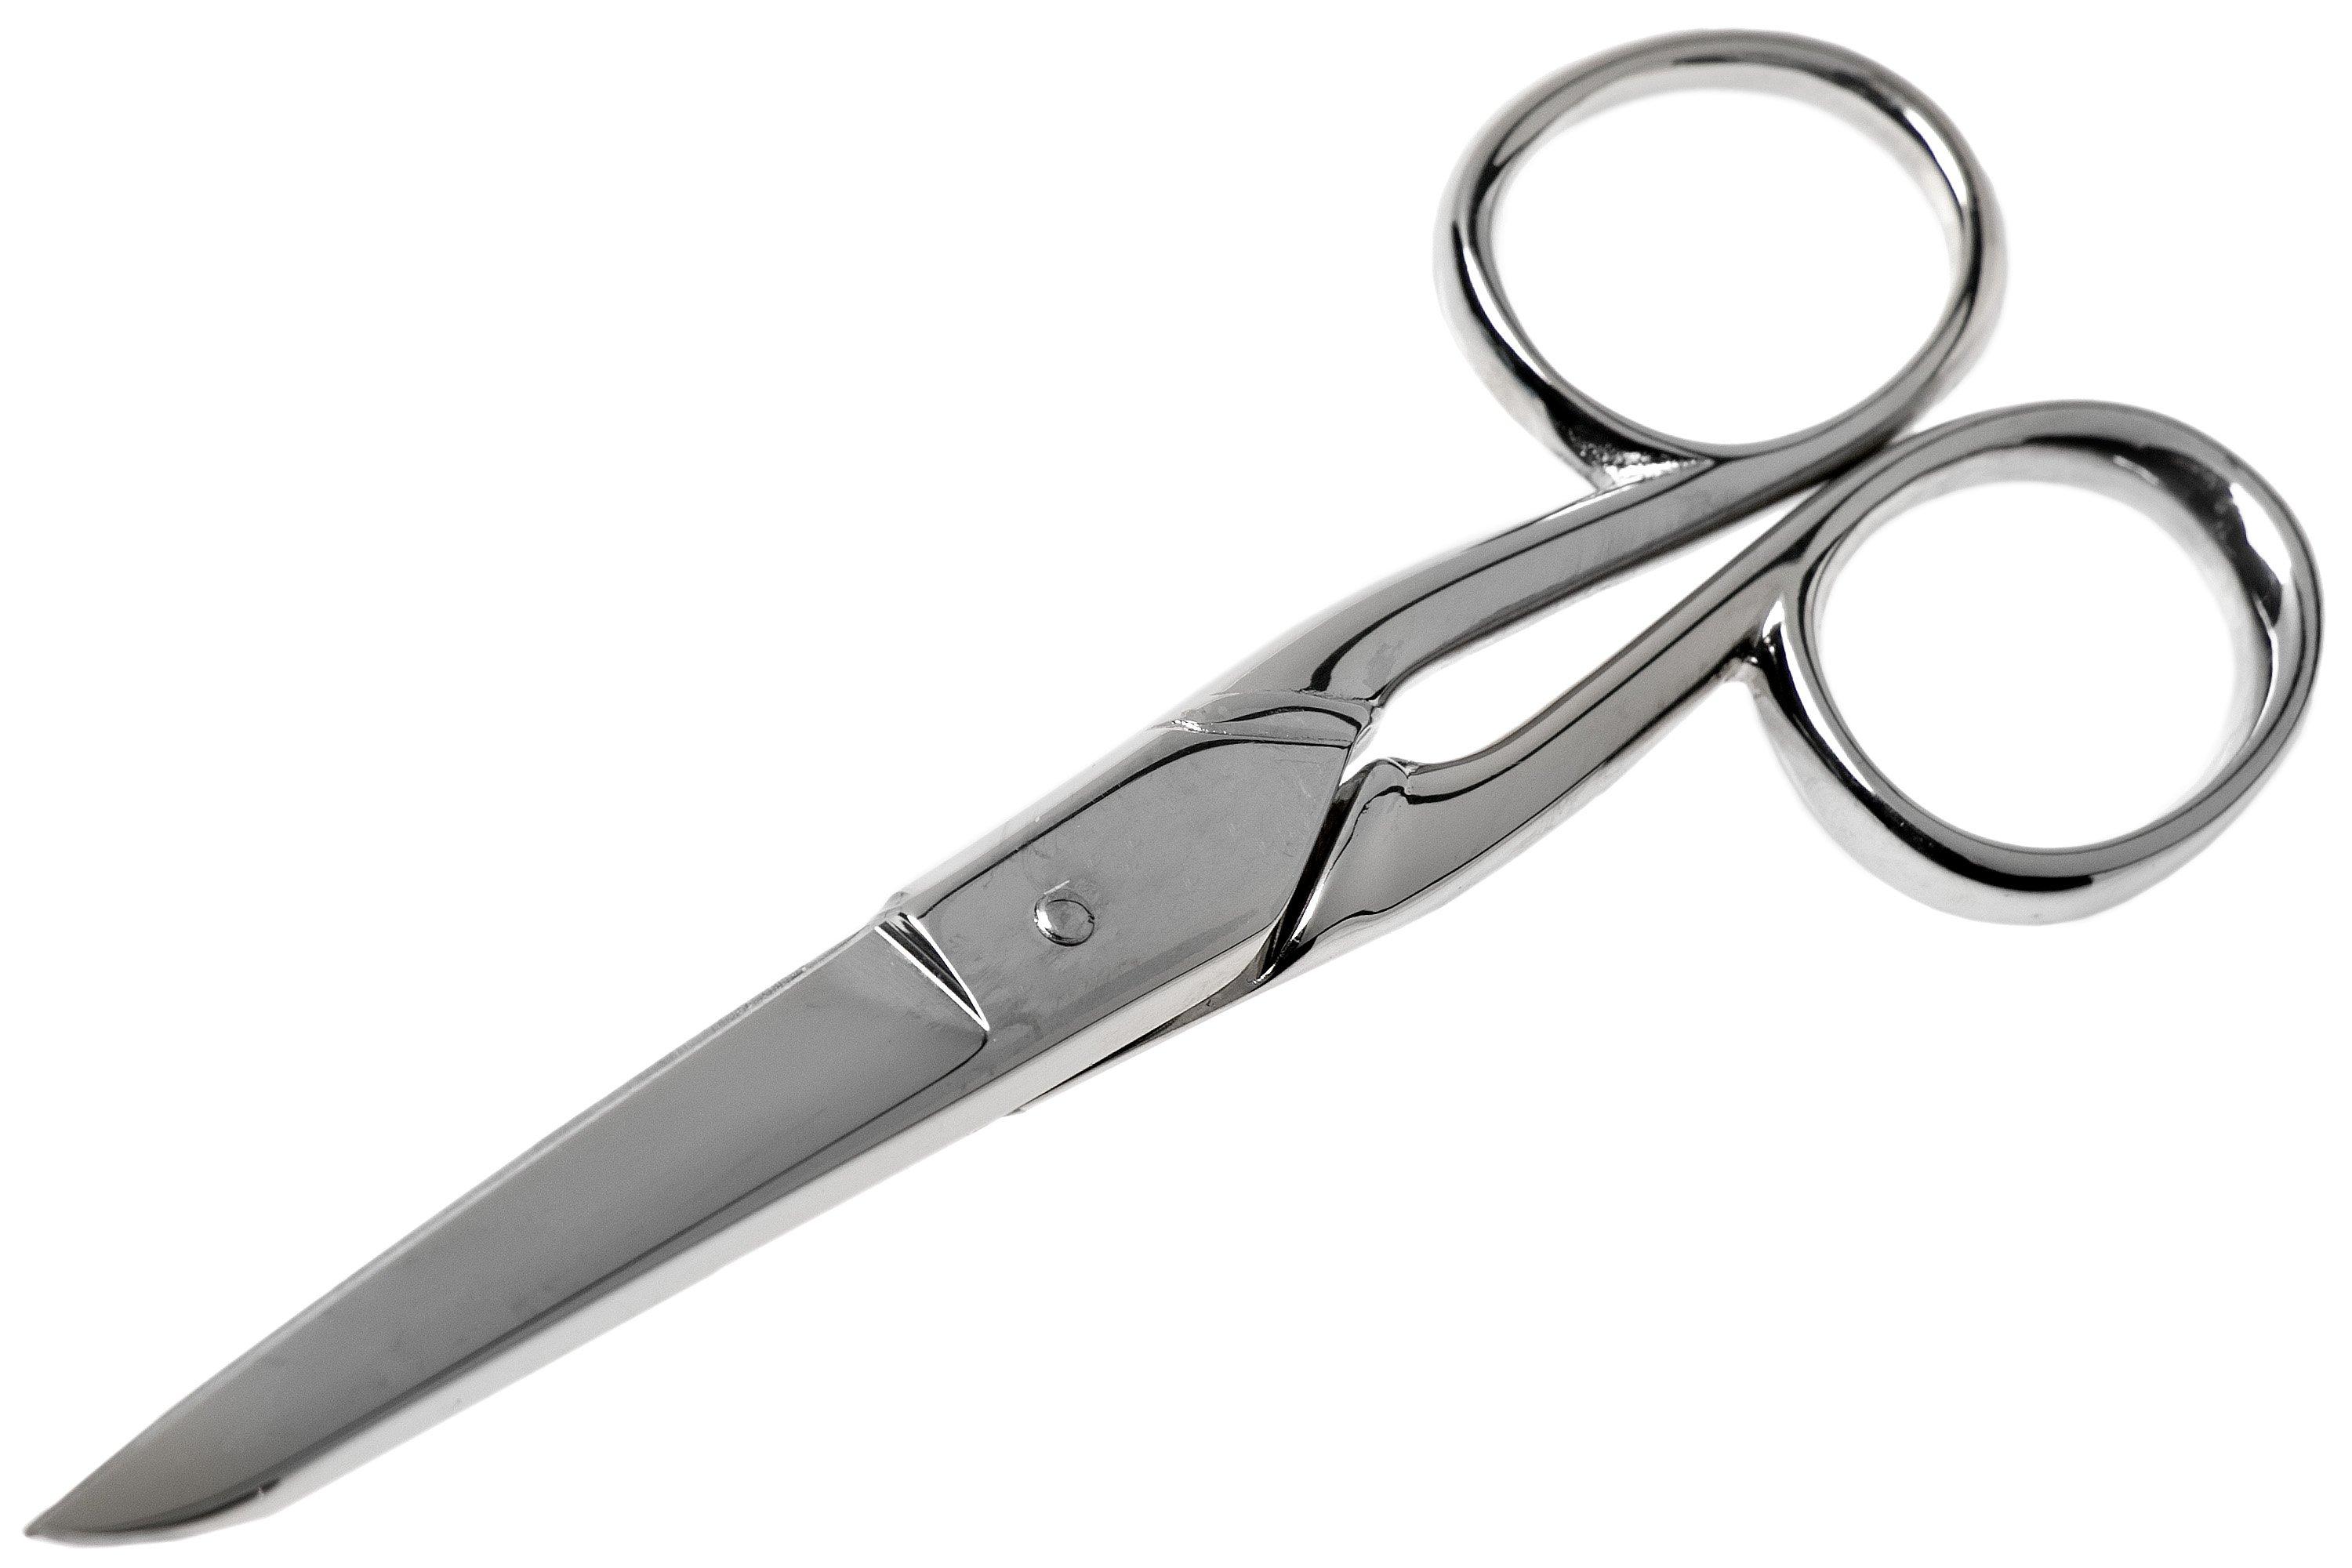 Victorinox France 8.1014.13, 13 scissors | at household Advantageously cm shopping